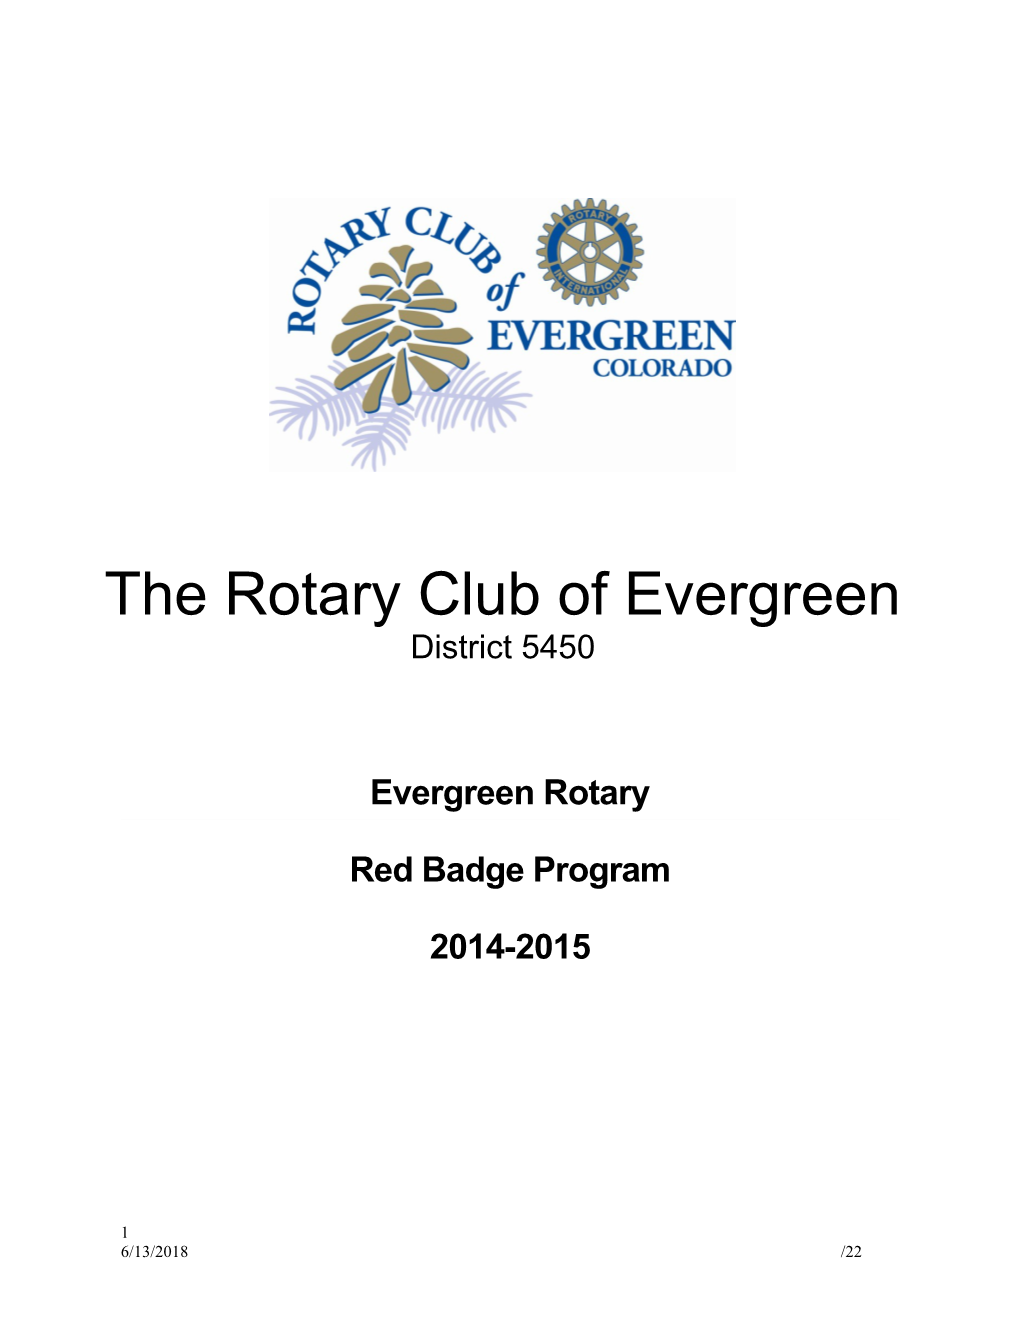 The Rotary Club of Evergreen